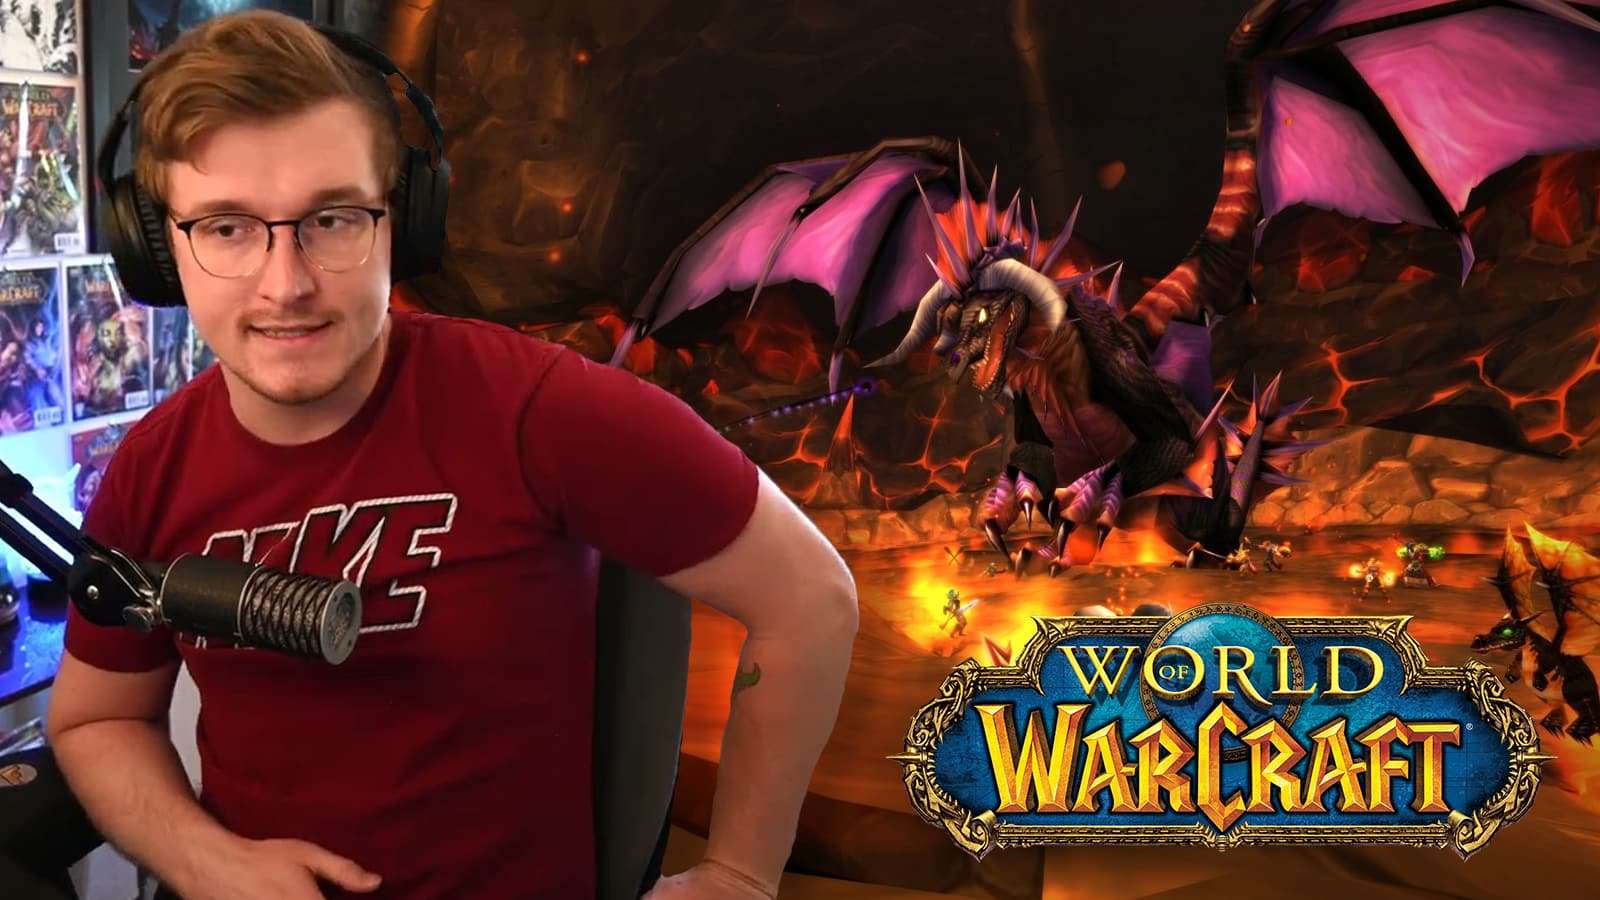 WoW streamer claims Blizzard's "perverted" culture killed game in explosive rant